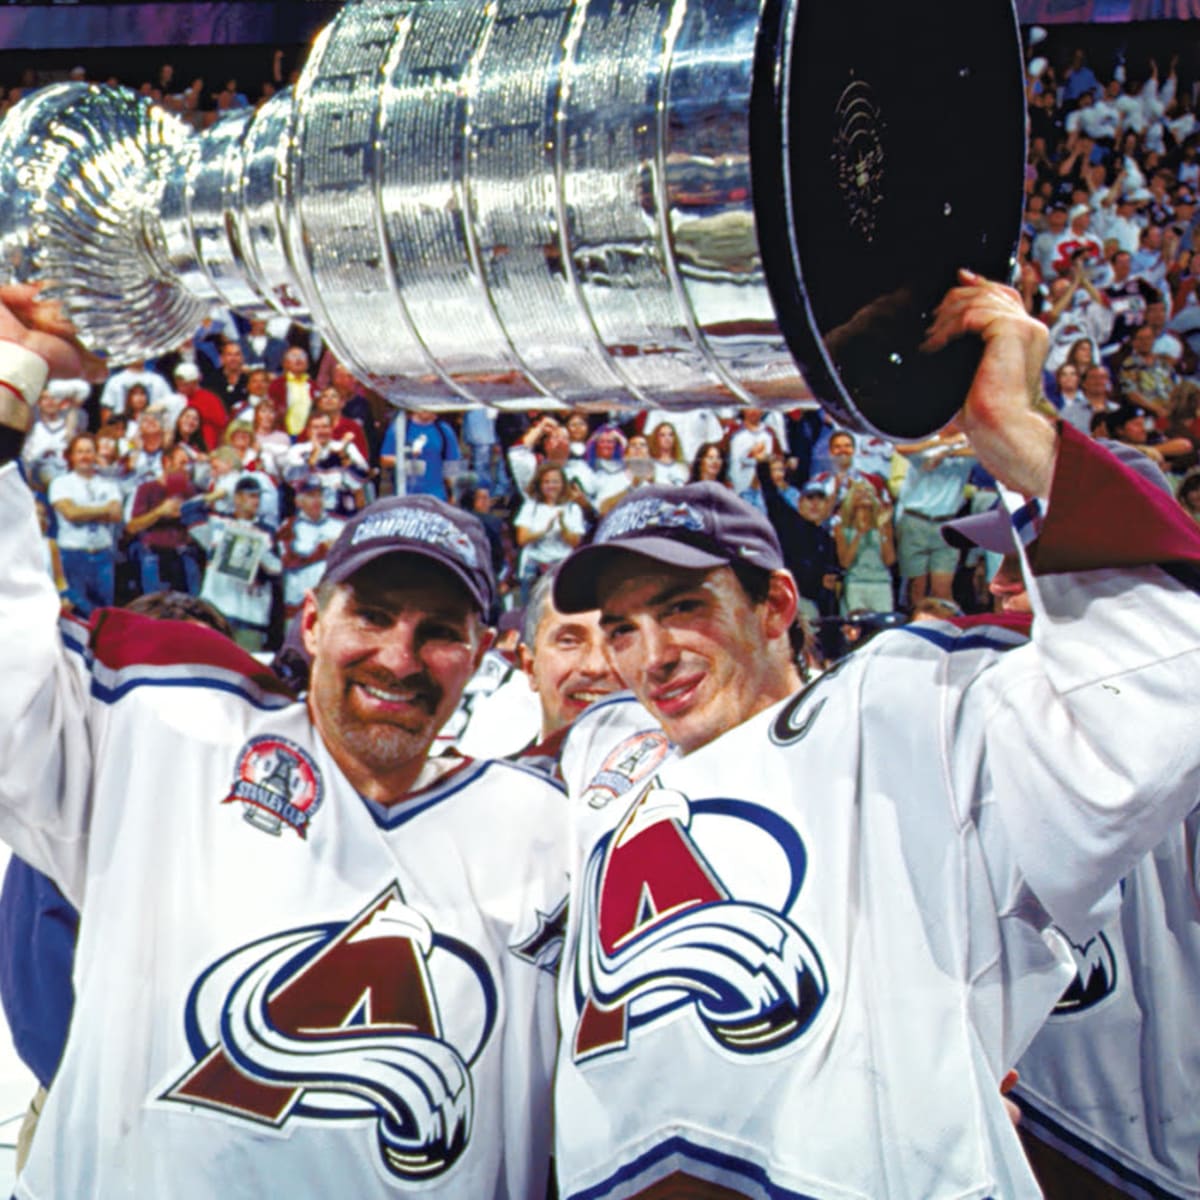 NHL Playoffs 2001 - Stanley Cup Championship: Avs get job done in